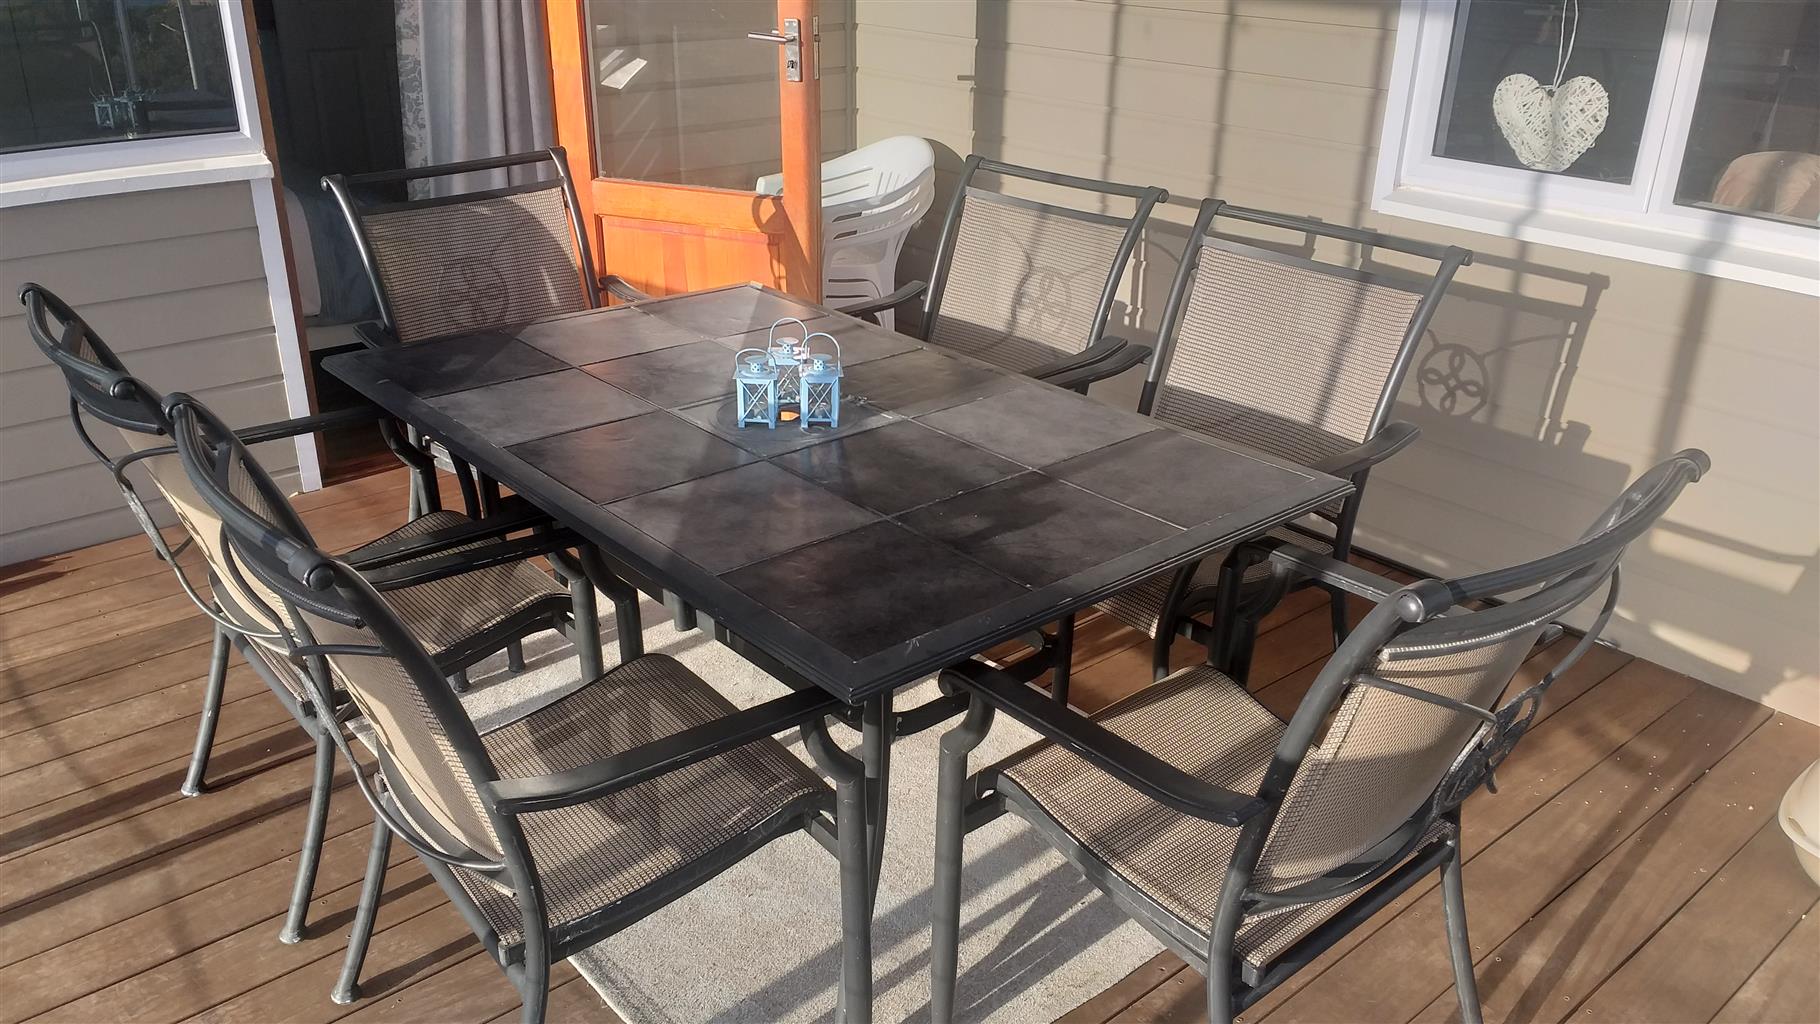 6 SEATER PATIO TABLE FOR SALE